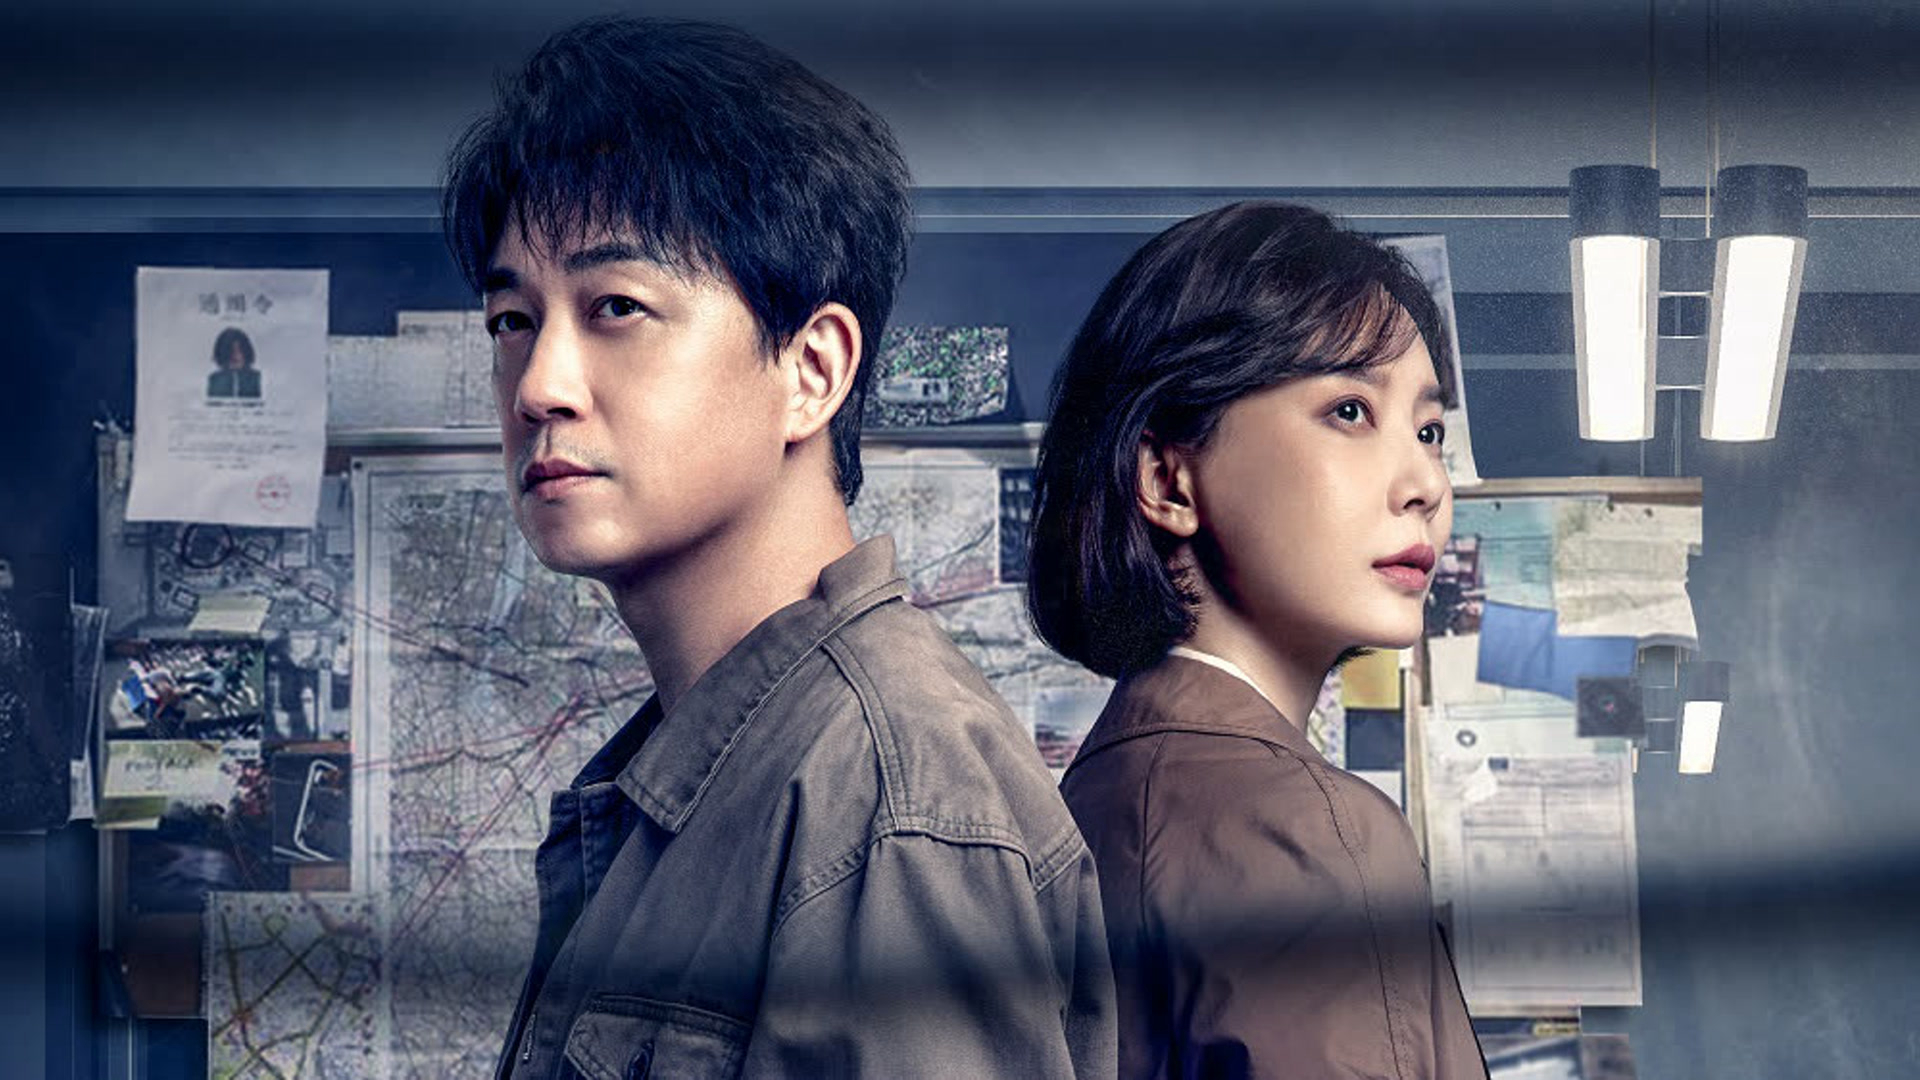 Banner Phim Tầng 11 Biến Mất (THE LOST 11TH FLOOR)